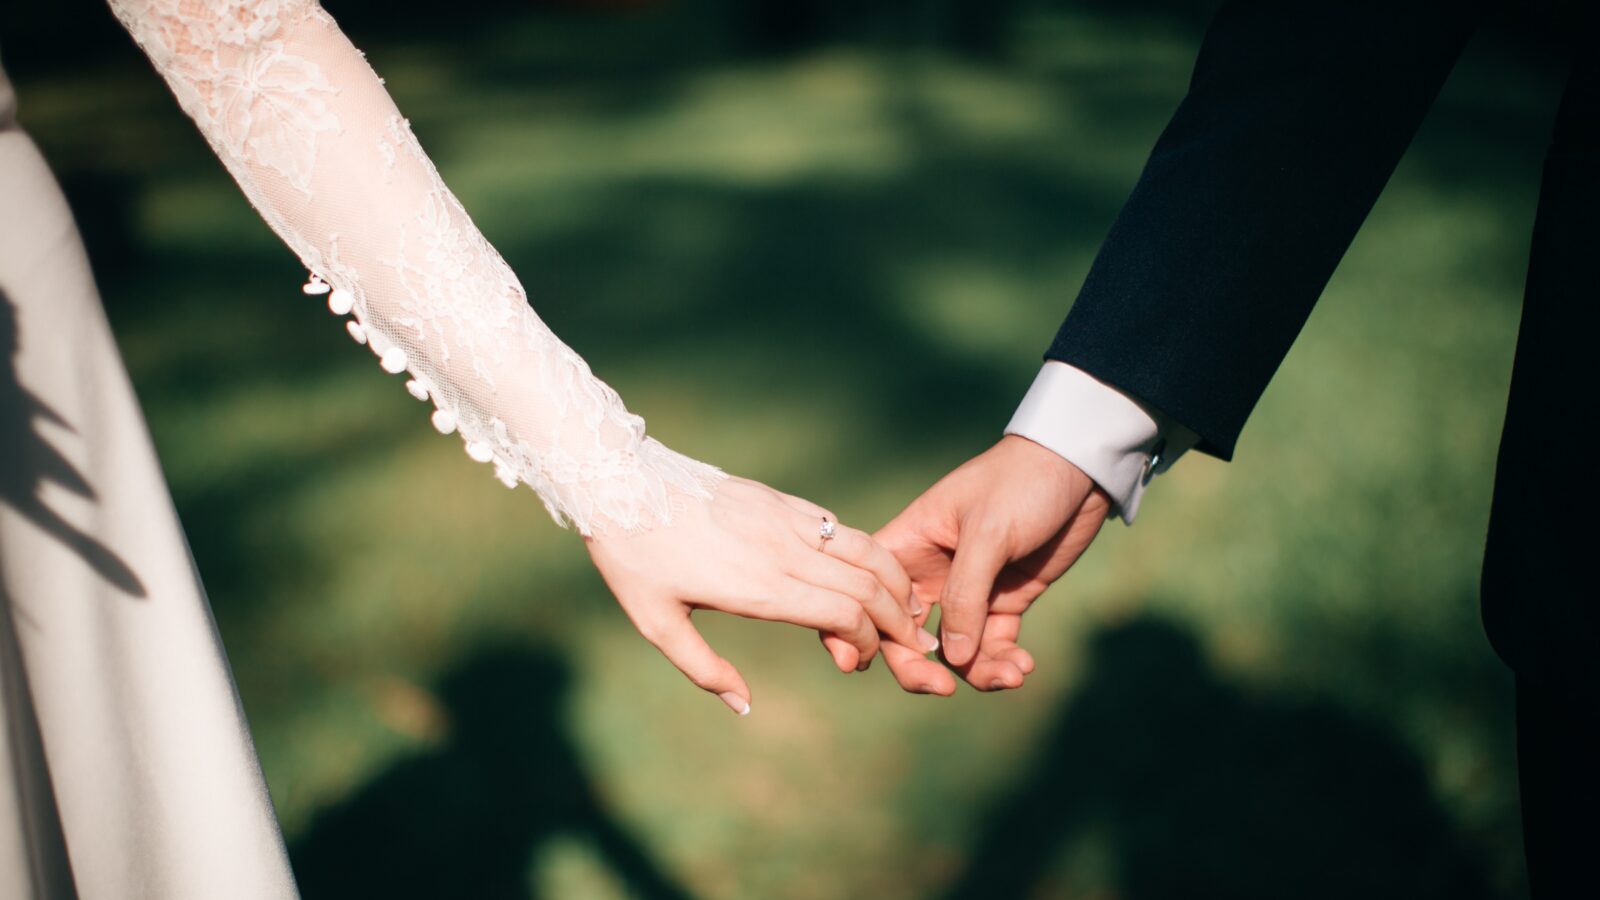 Man & Woman holding hands representing due diligence in marriage contracts